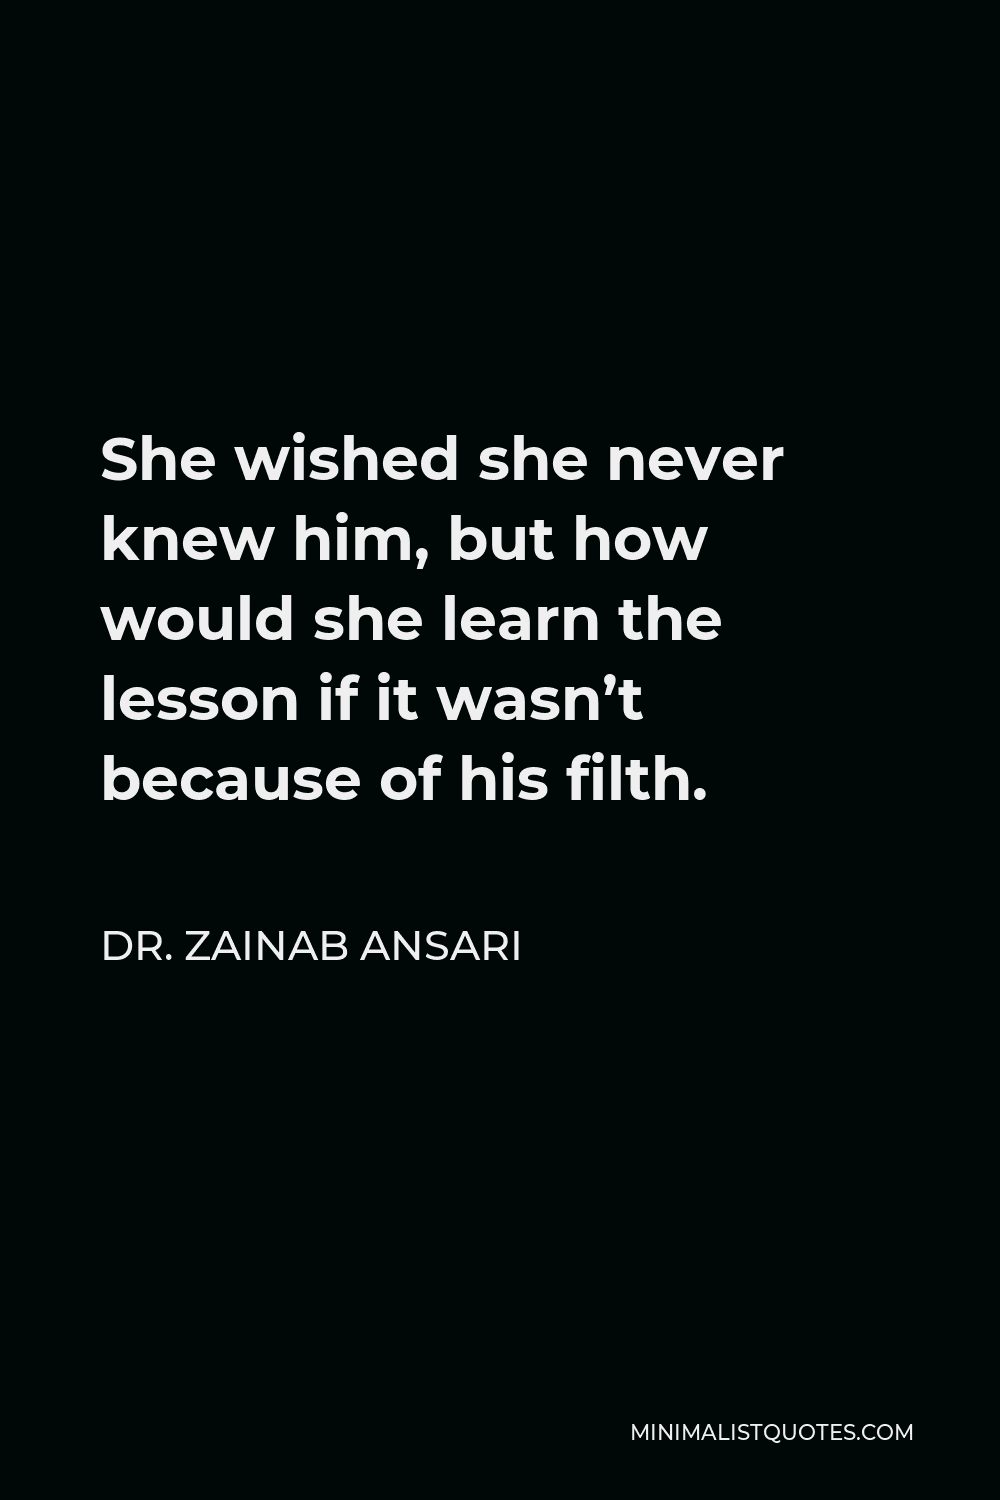 Dr. Zainab Ansari Quote - She wished she never knew him, but how would she learn the lesson if it wasn’t because of his filth.